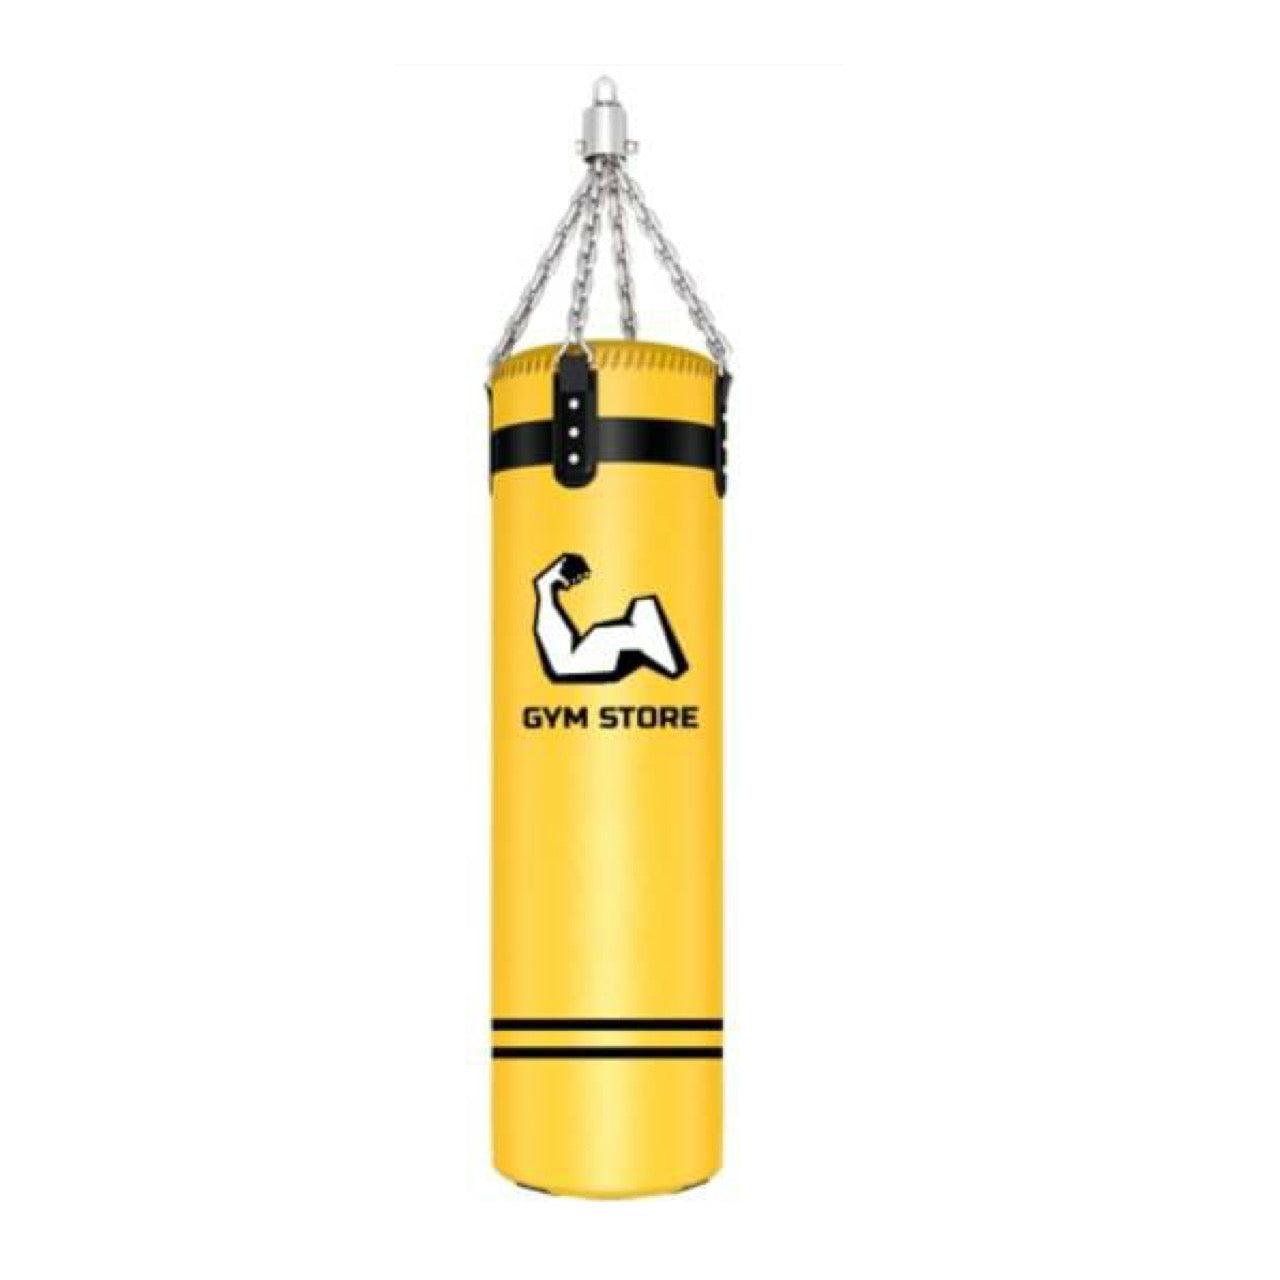 Boxing Bag 120 CM Black White or Red - Future Store